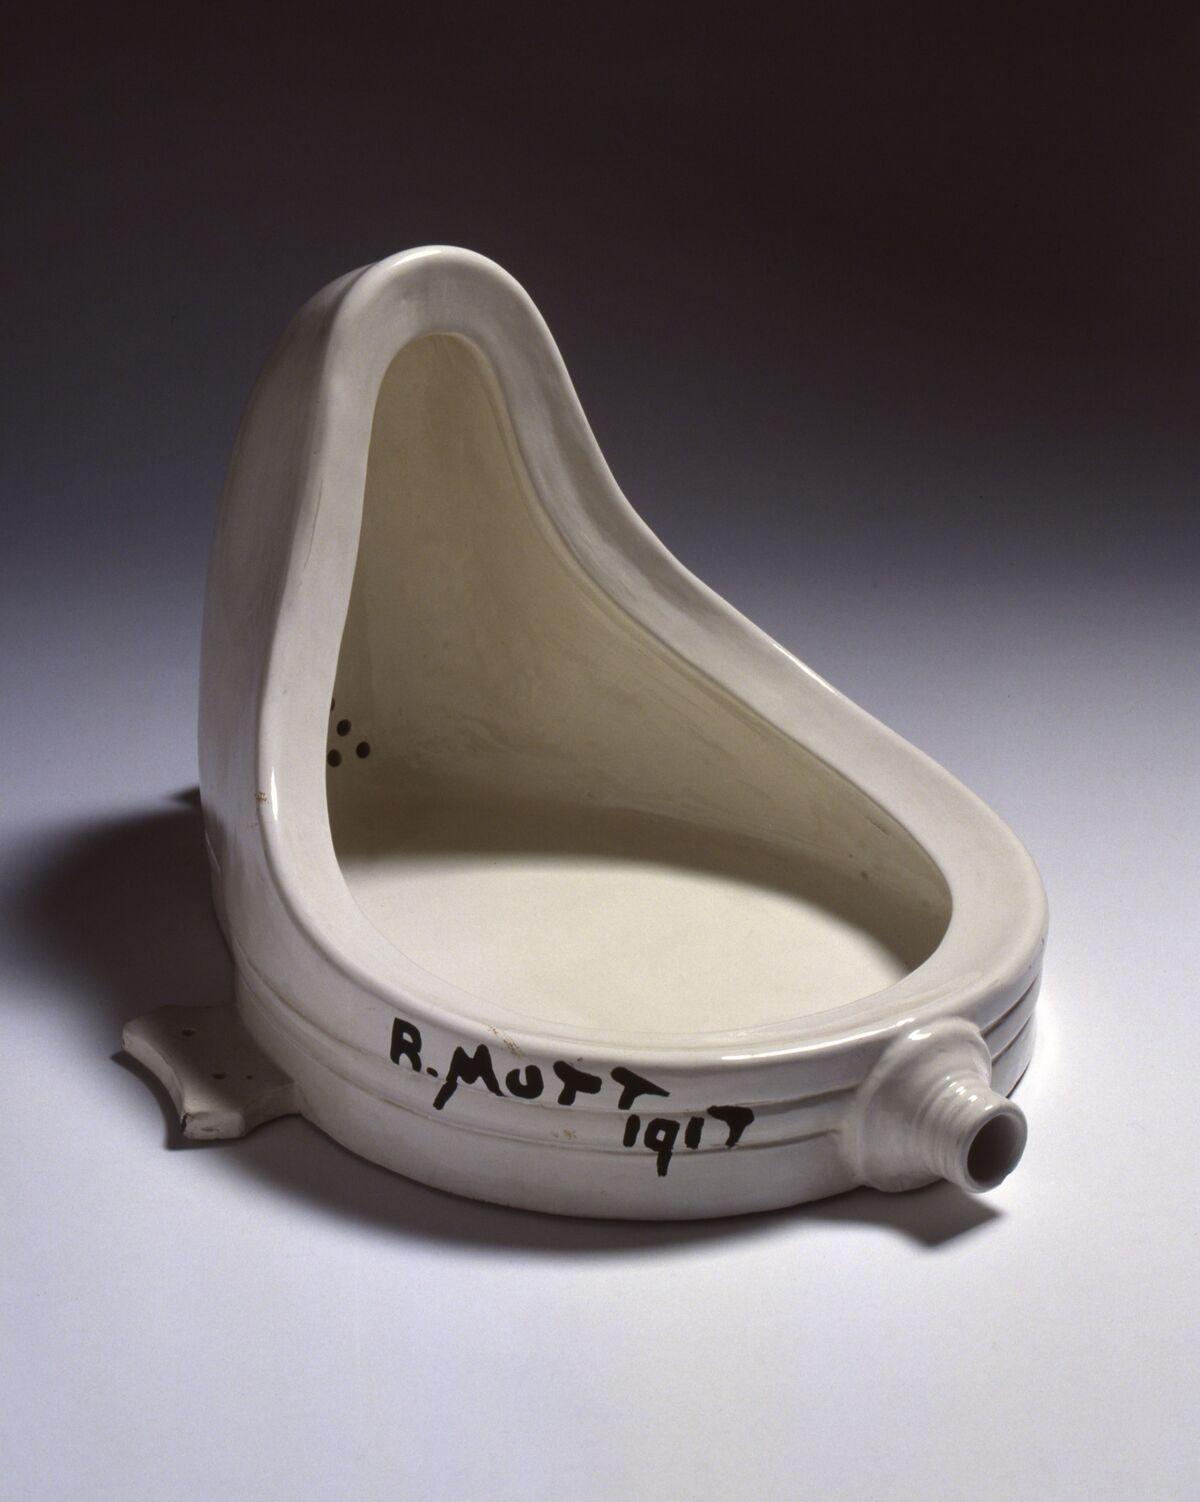 Dalí Museum Showcasing Friendship with Duchamp Asks What is Art